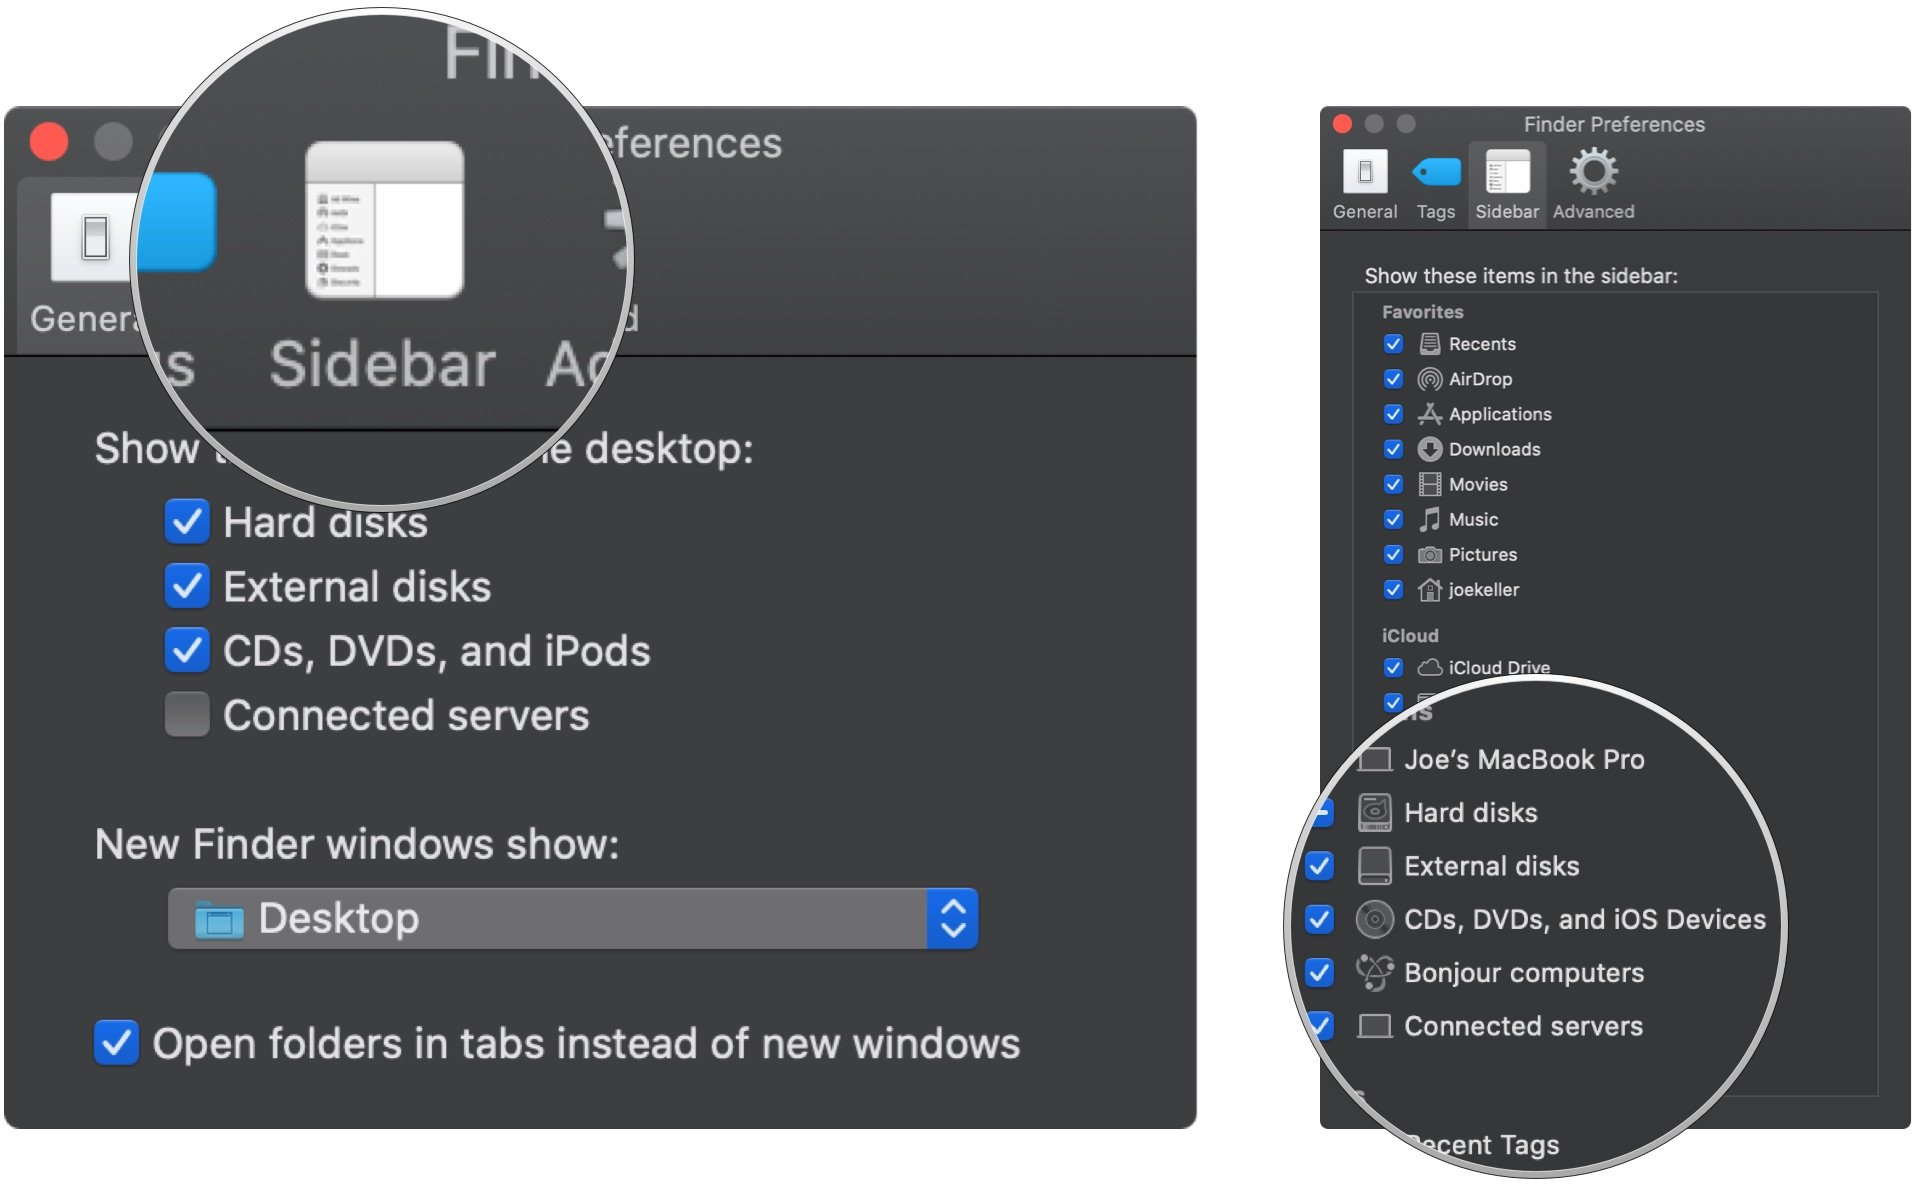 Show iPhone in Finder showing how to click the Sidebar tab, then click the CDs, DVDs, and iOS Devices checkbox